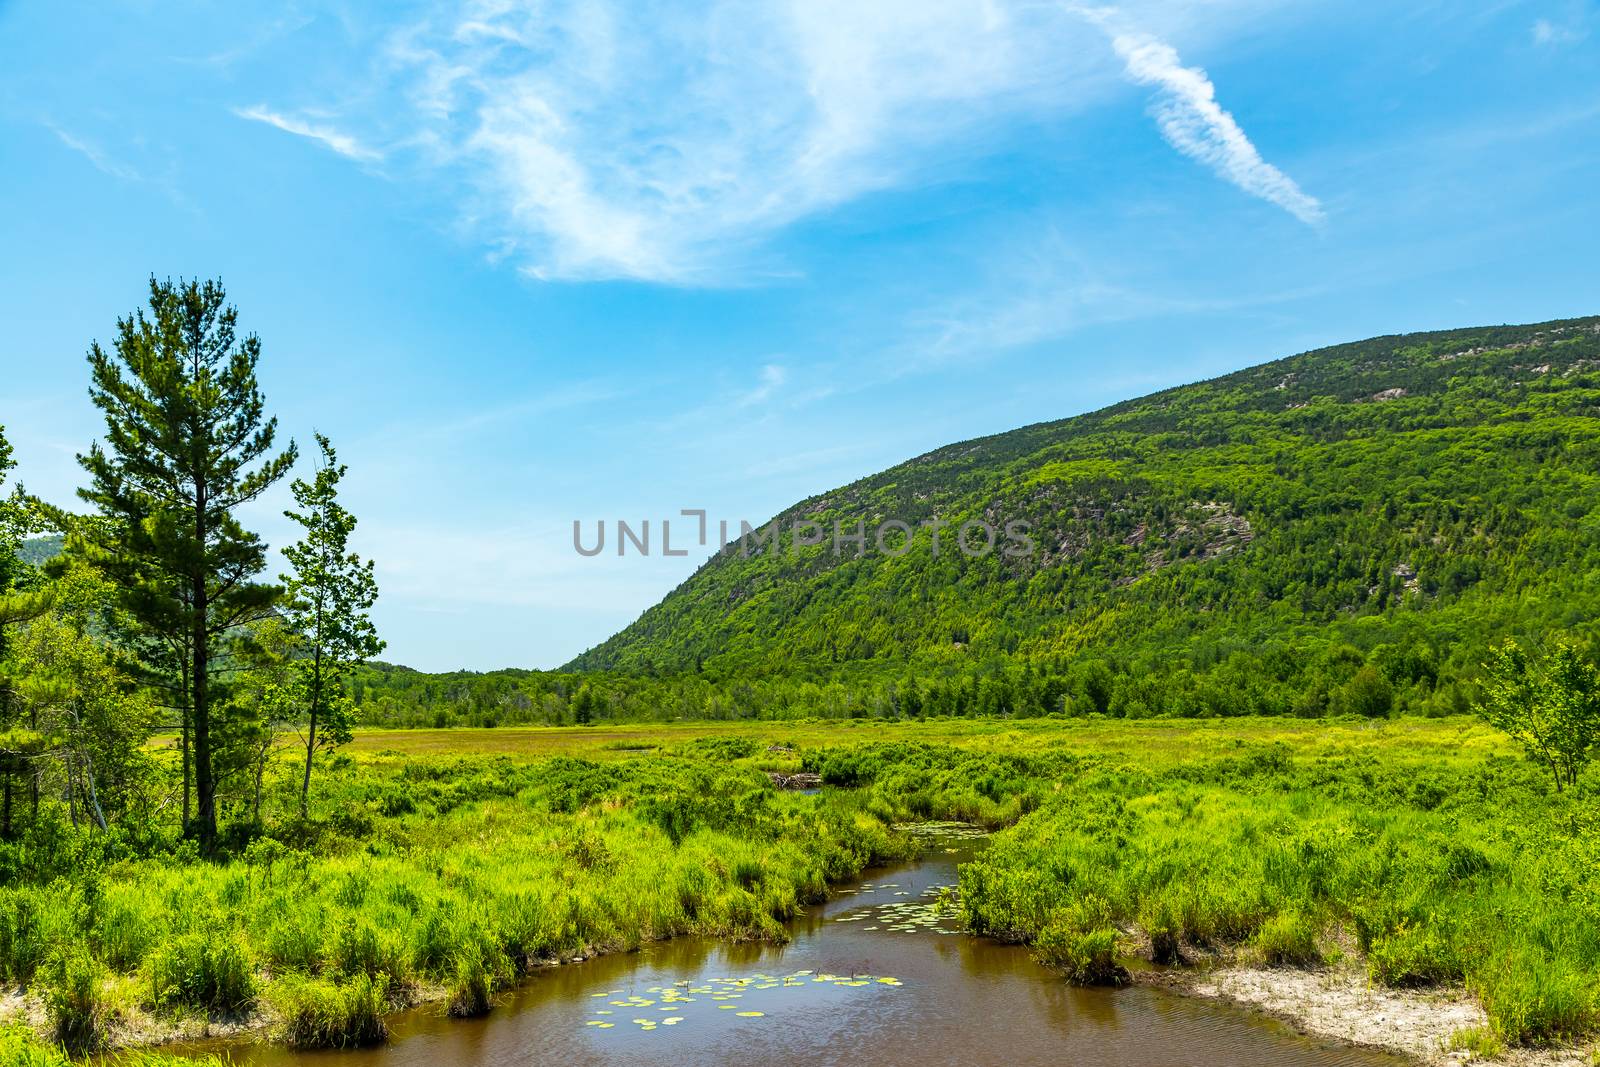 Beaver Dams are visible upstream at Cromwell Brook in Acadia National Park, Maine. Beaver dams are created as protection against predators, such as coyotes, wolves, and bears, and to provide easy access to food during winter.